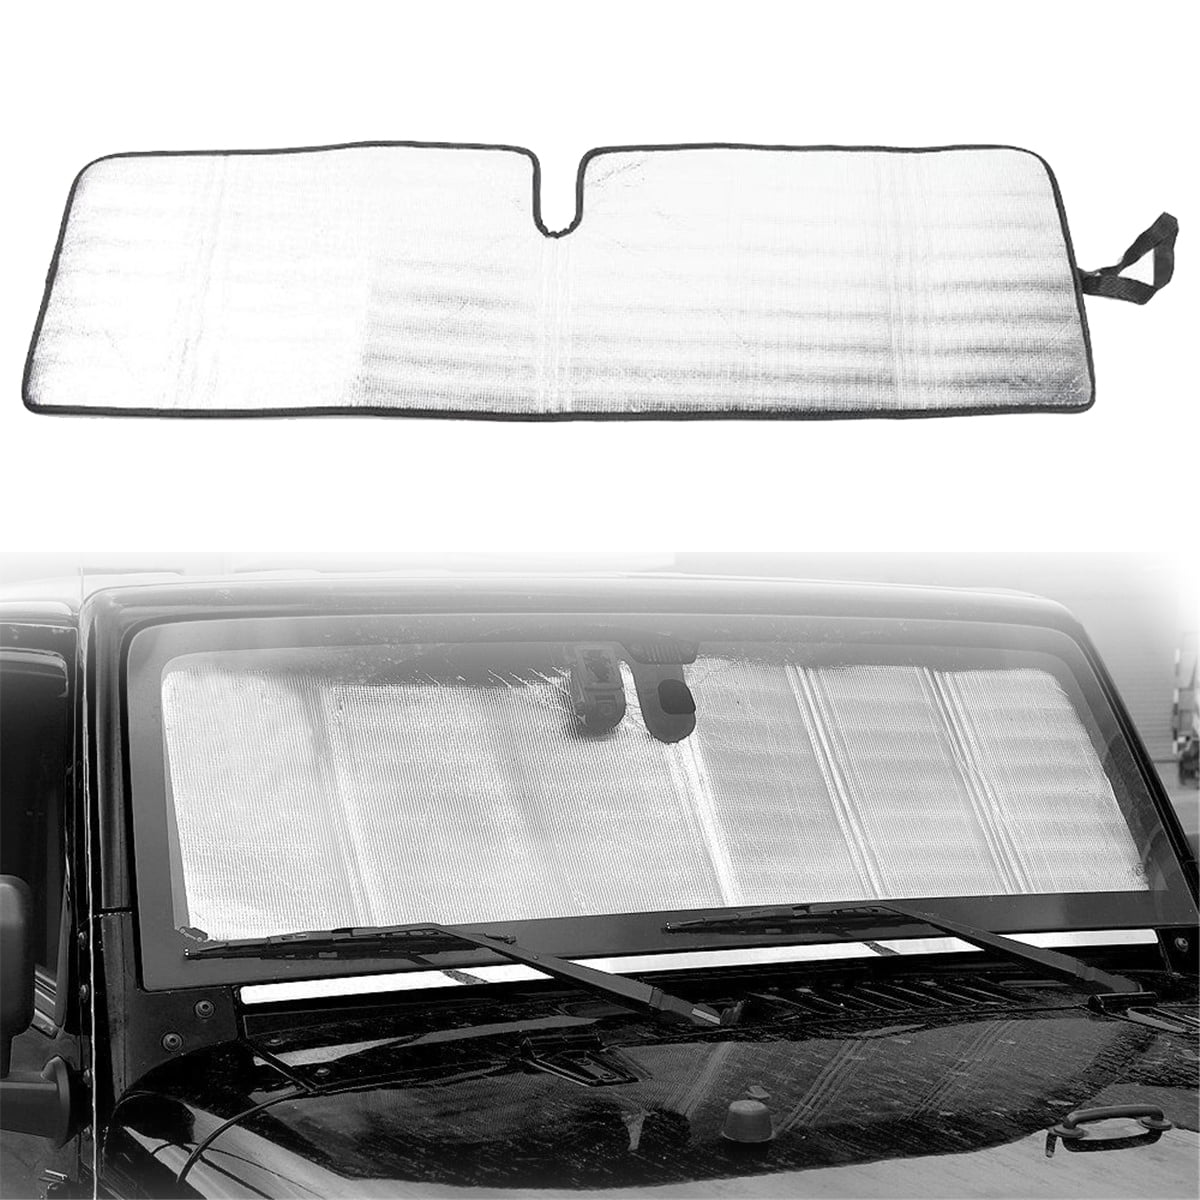 Sunshade to Keep Your Vehicle Cool and Damage Free,Easy to Use Fits Windshields of Various Sizes Wogrto Batmans Jokers Car Windshield Sun Shade-Blocks Uv Rays Sun Visor Protector 